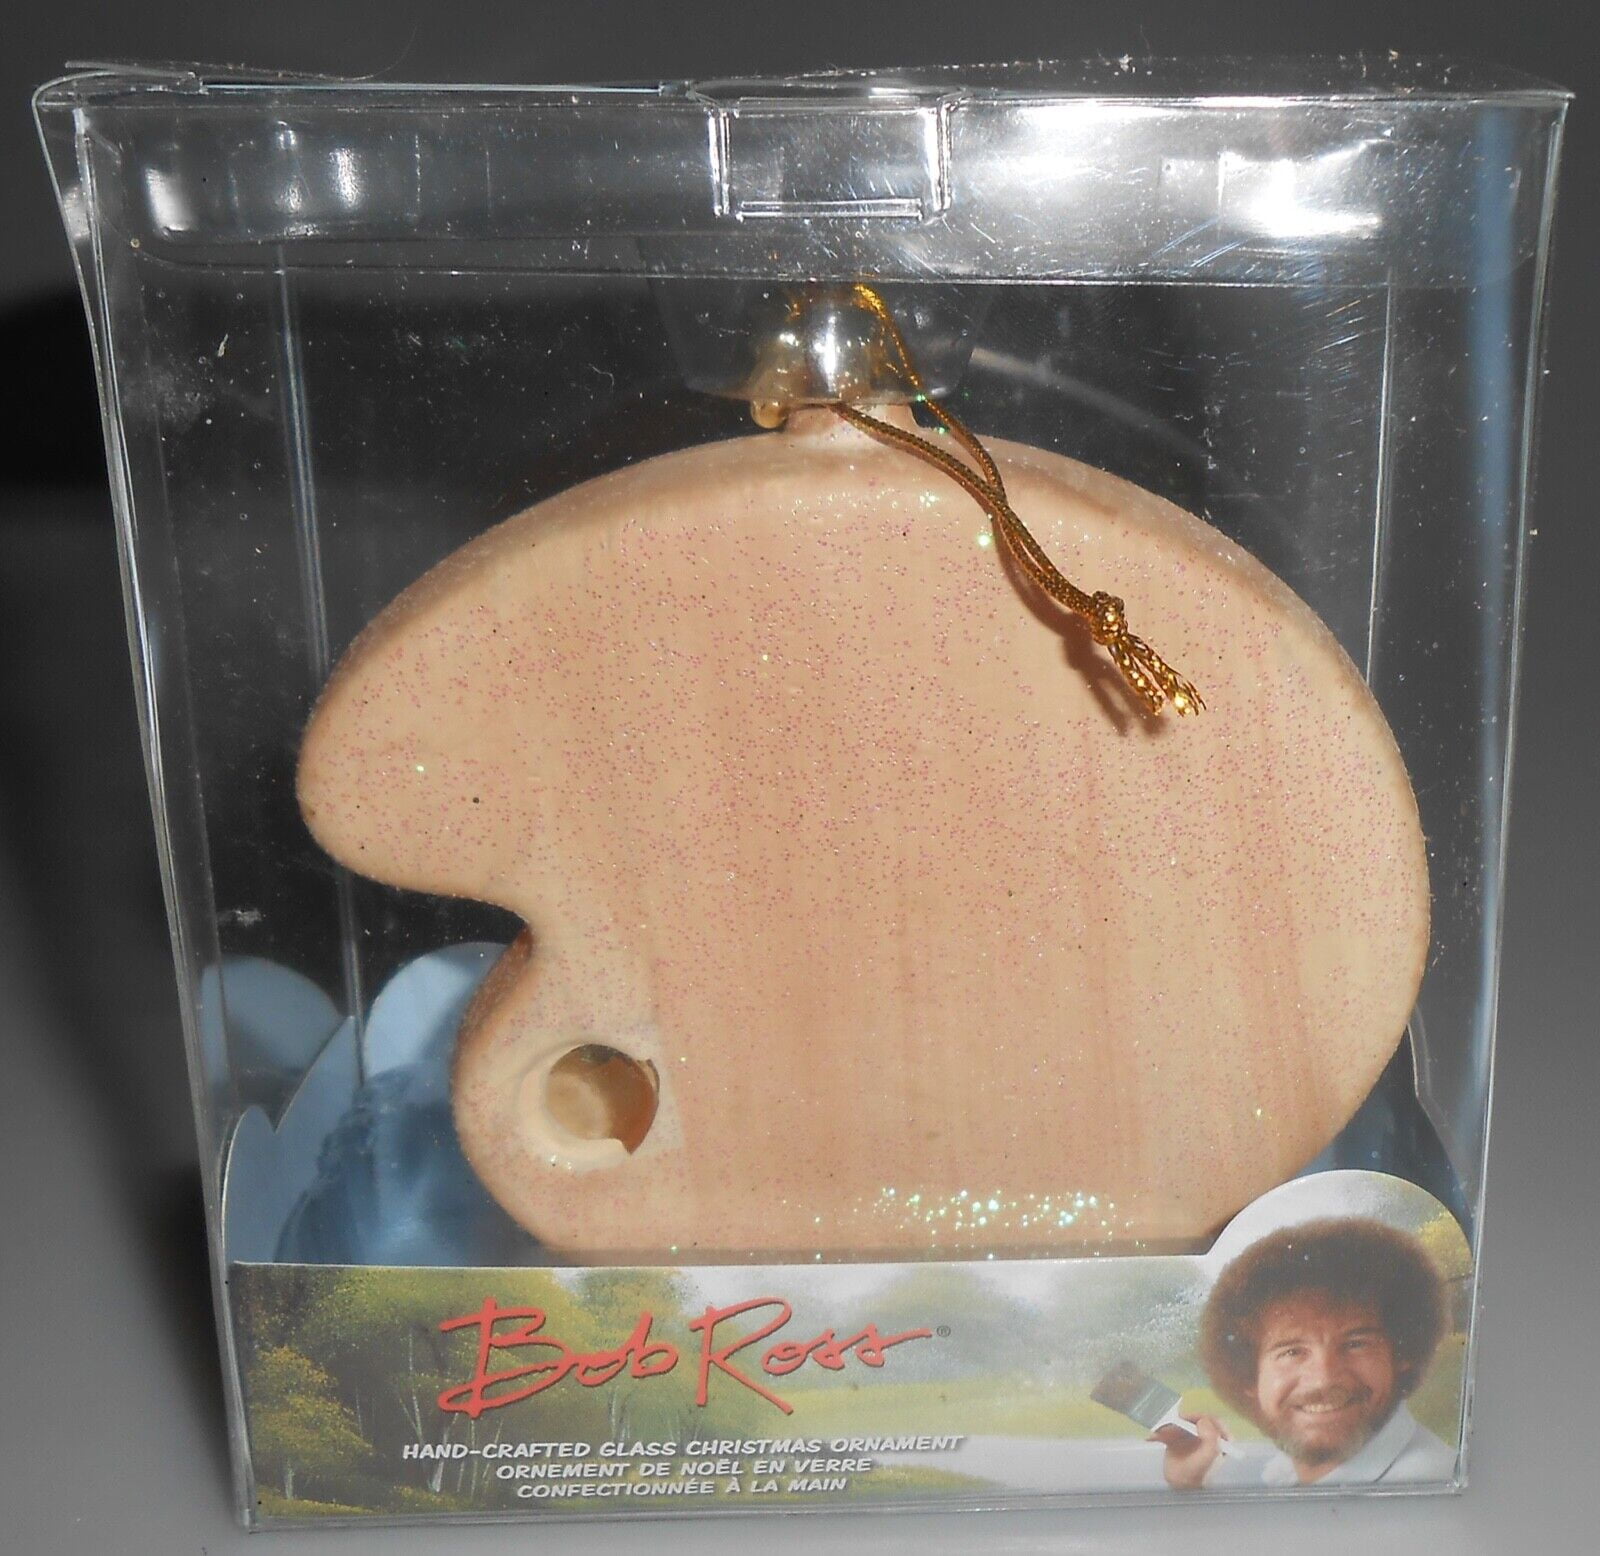 Happy Little Christmas Bob Ross Ornament Gifts For Him Her | Decorating  Your Christmas-Themed Home With Bob Ross - The Wholesale T-Shirts By VinCo